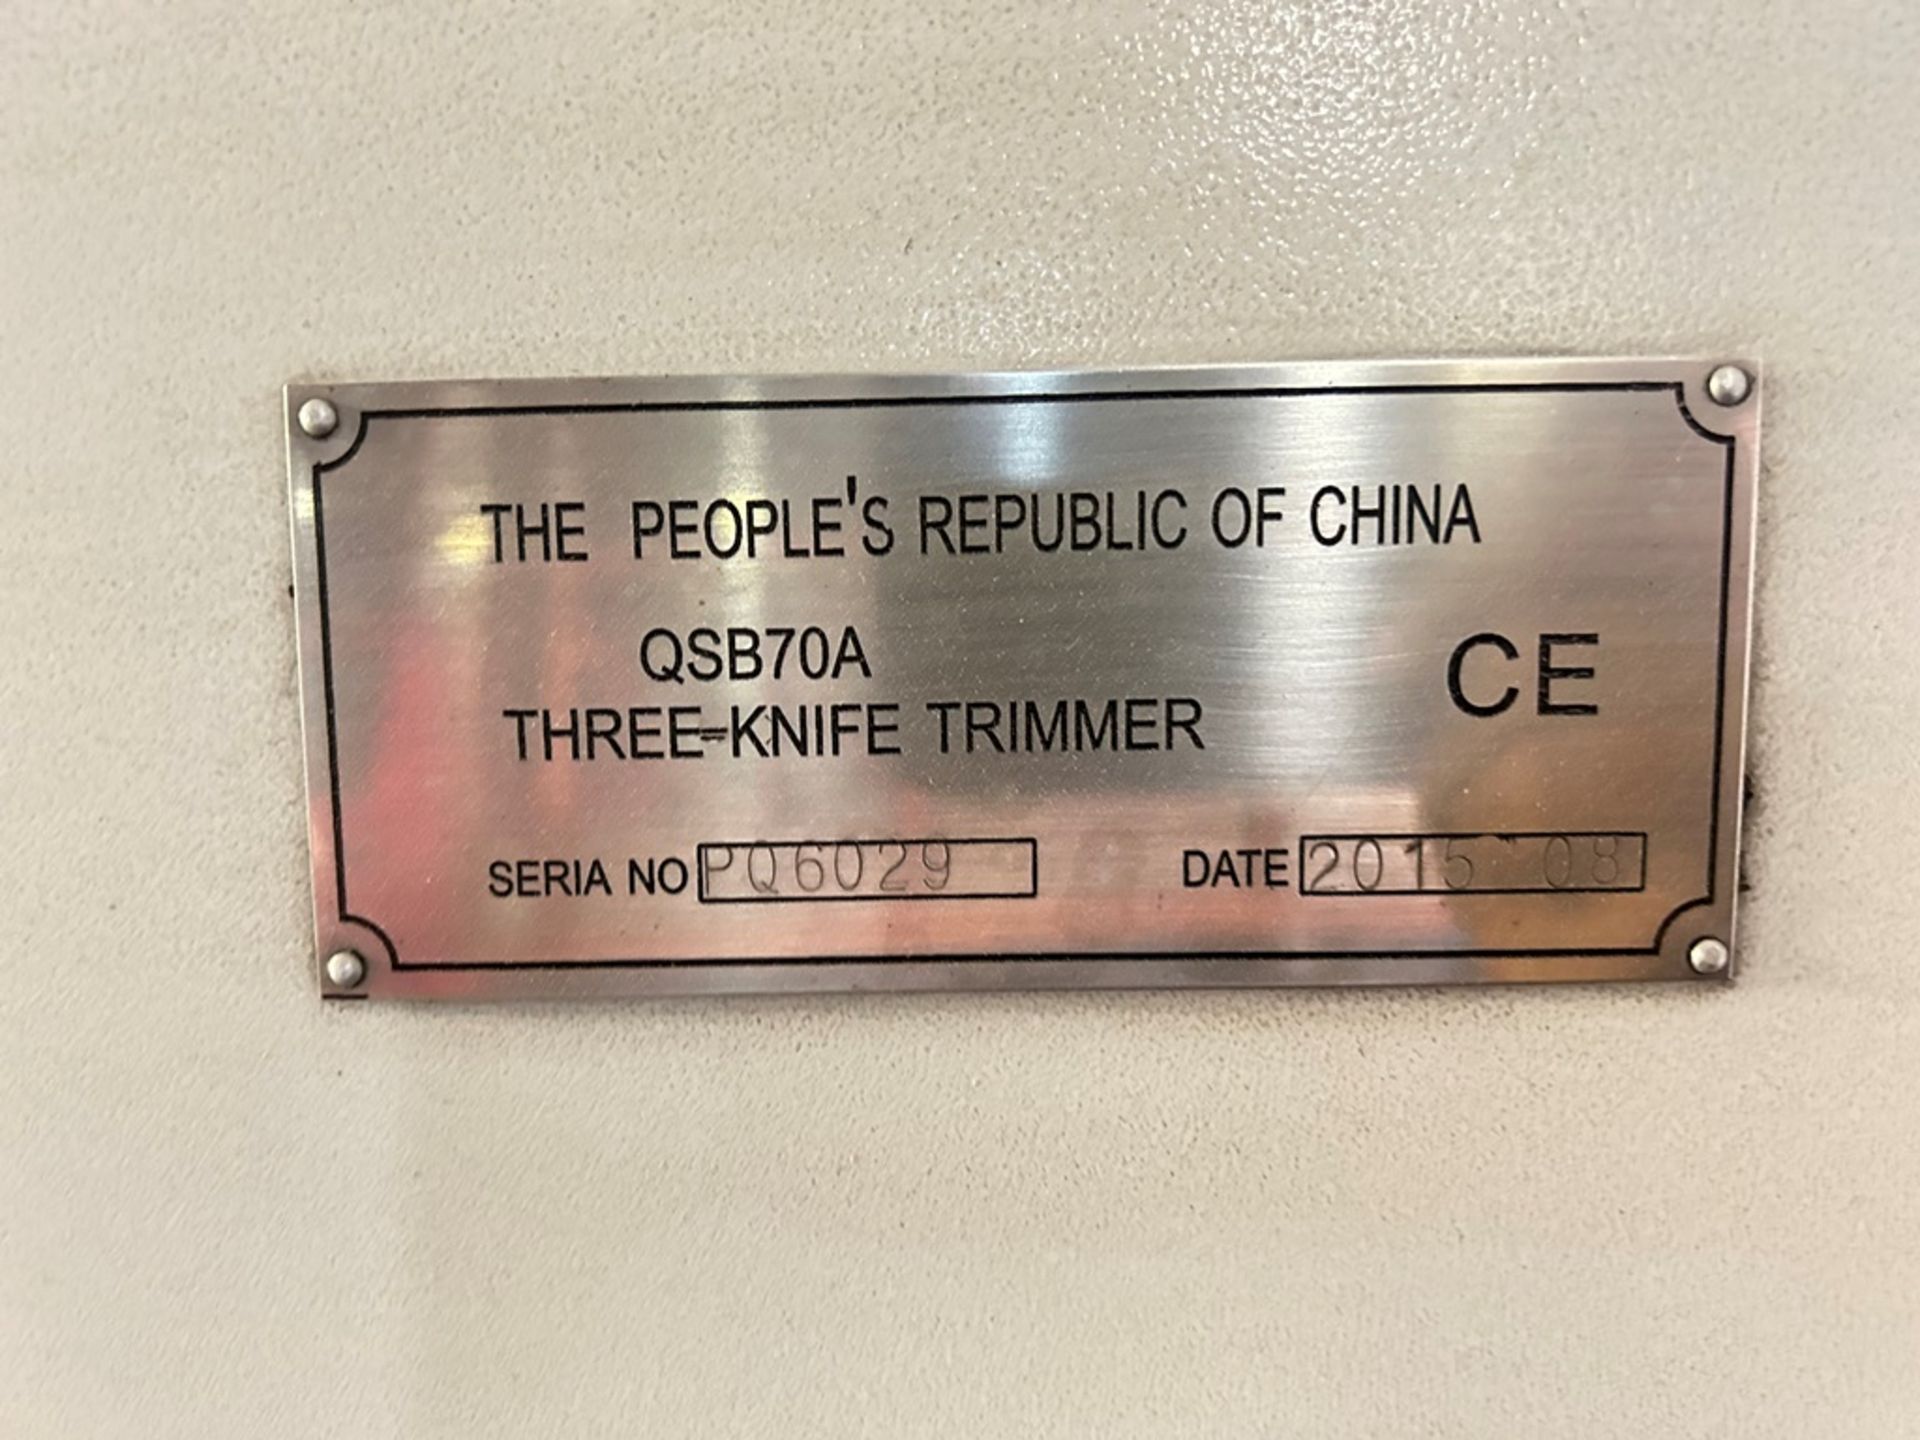 THE PEOPLE'S REPUBLIC OF CHINA Trilateral T Guillotine, Model QSB70A, Serial No. PQ6029, Year 2015 - Image 7 of 9